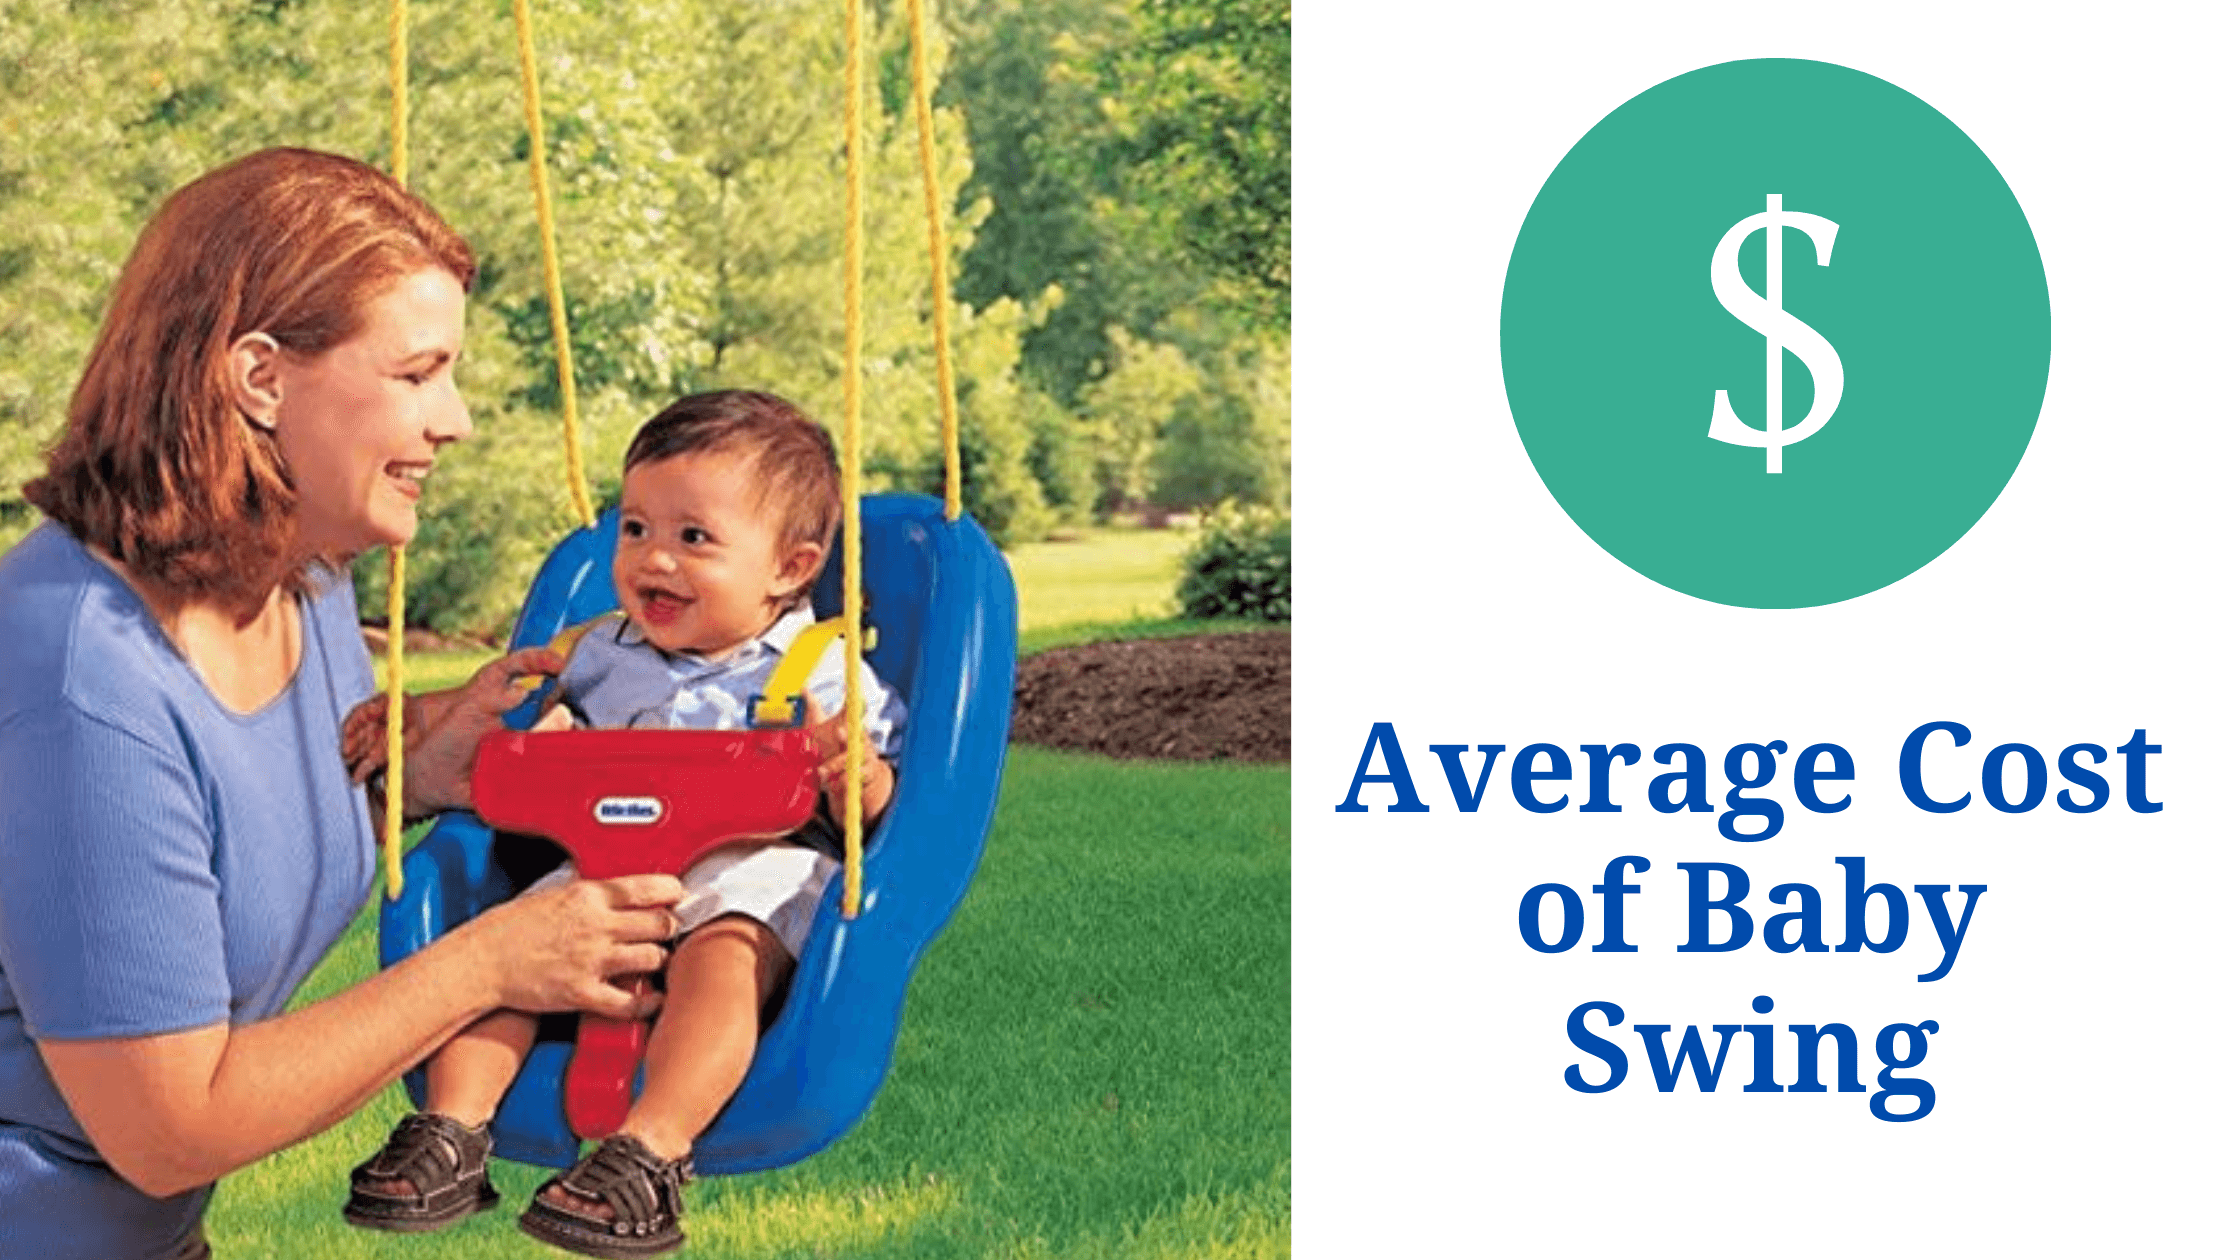 Average Cost of Baby Swing